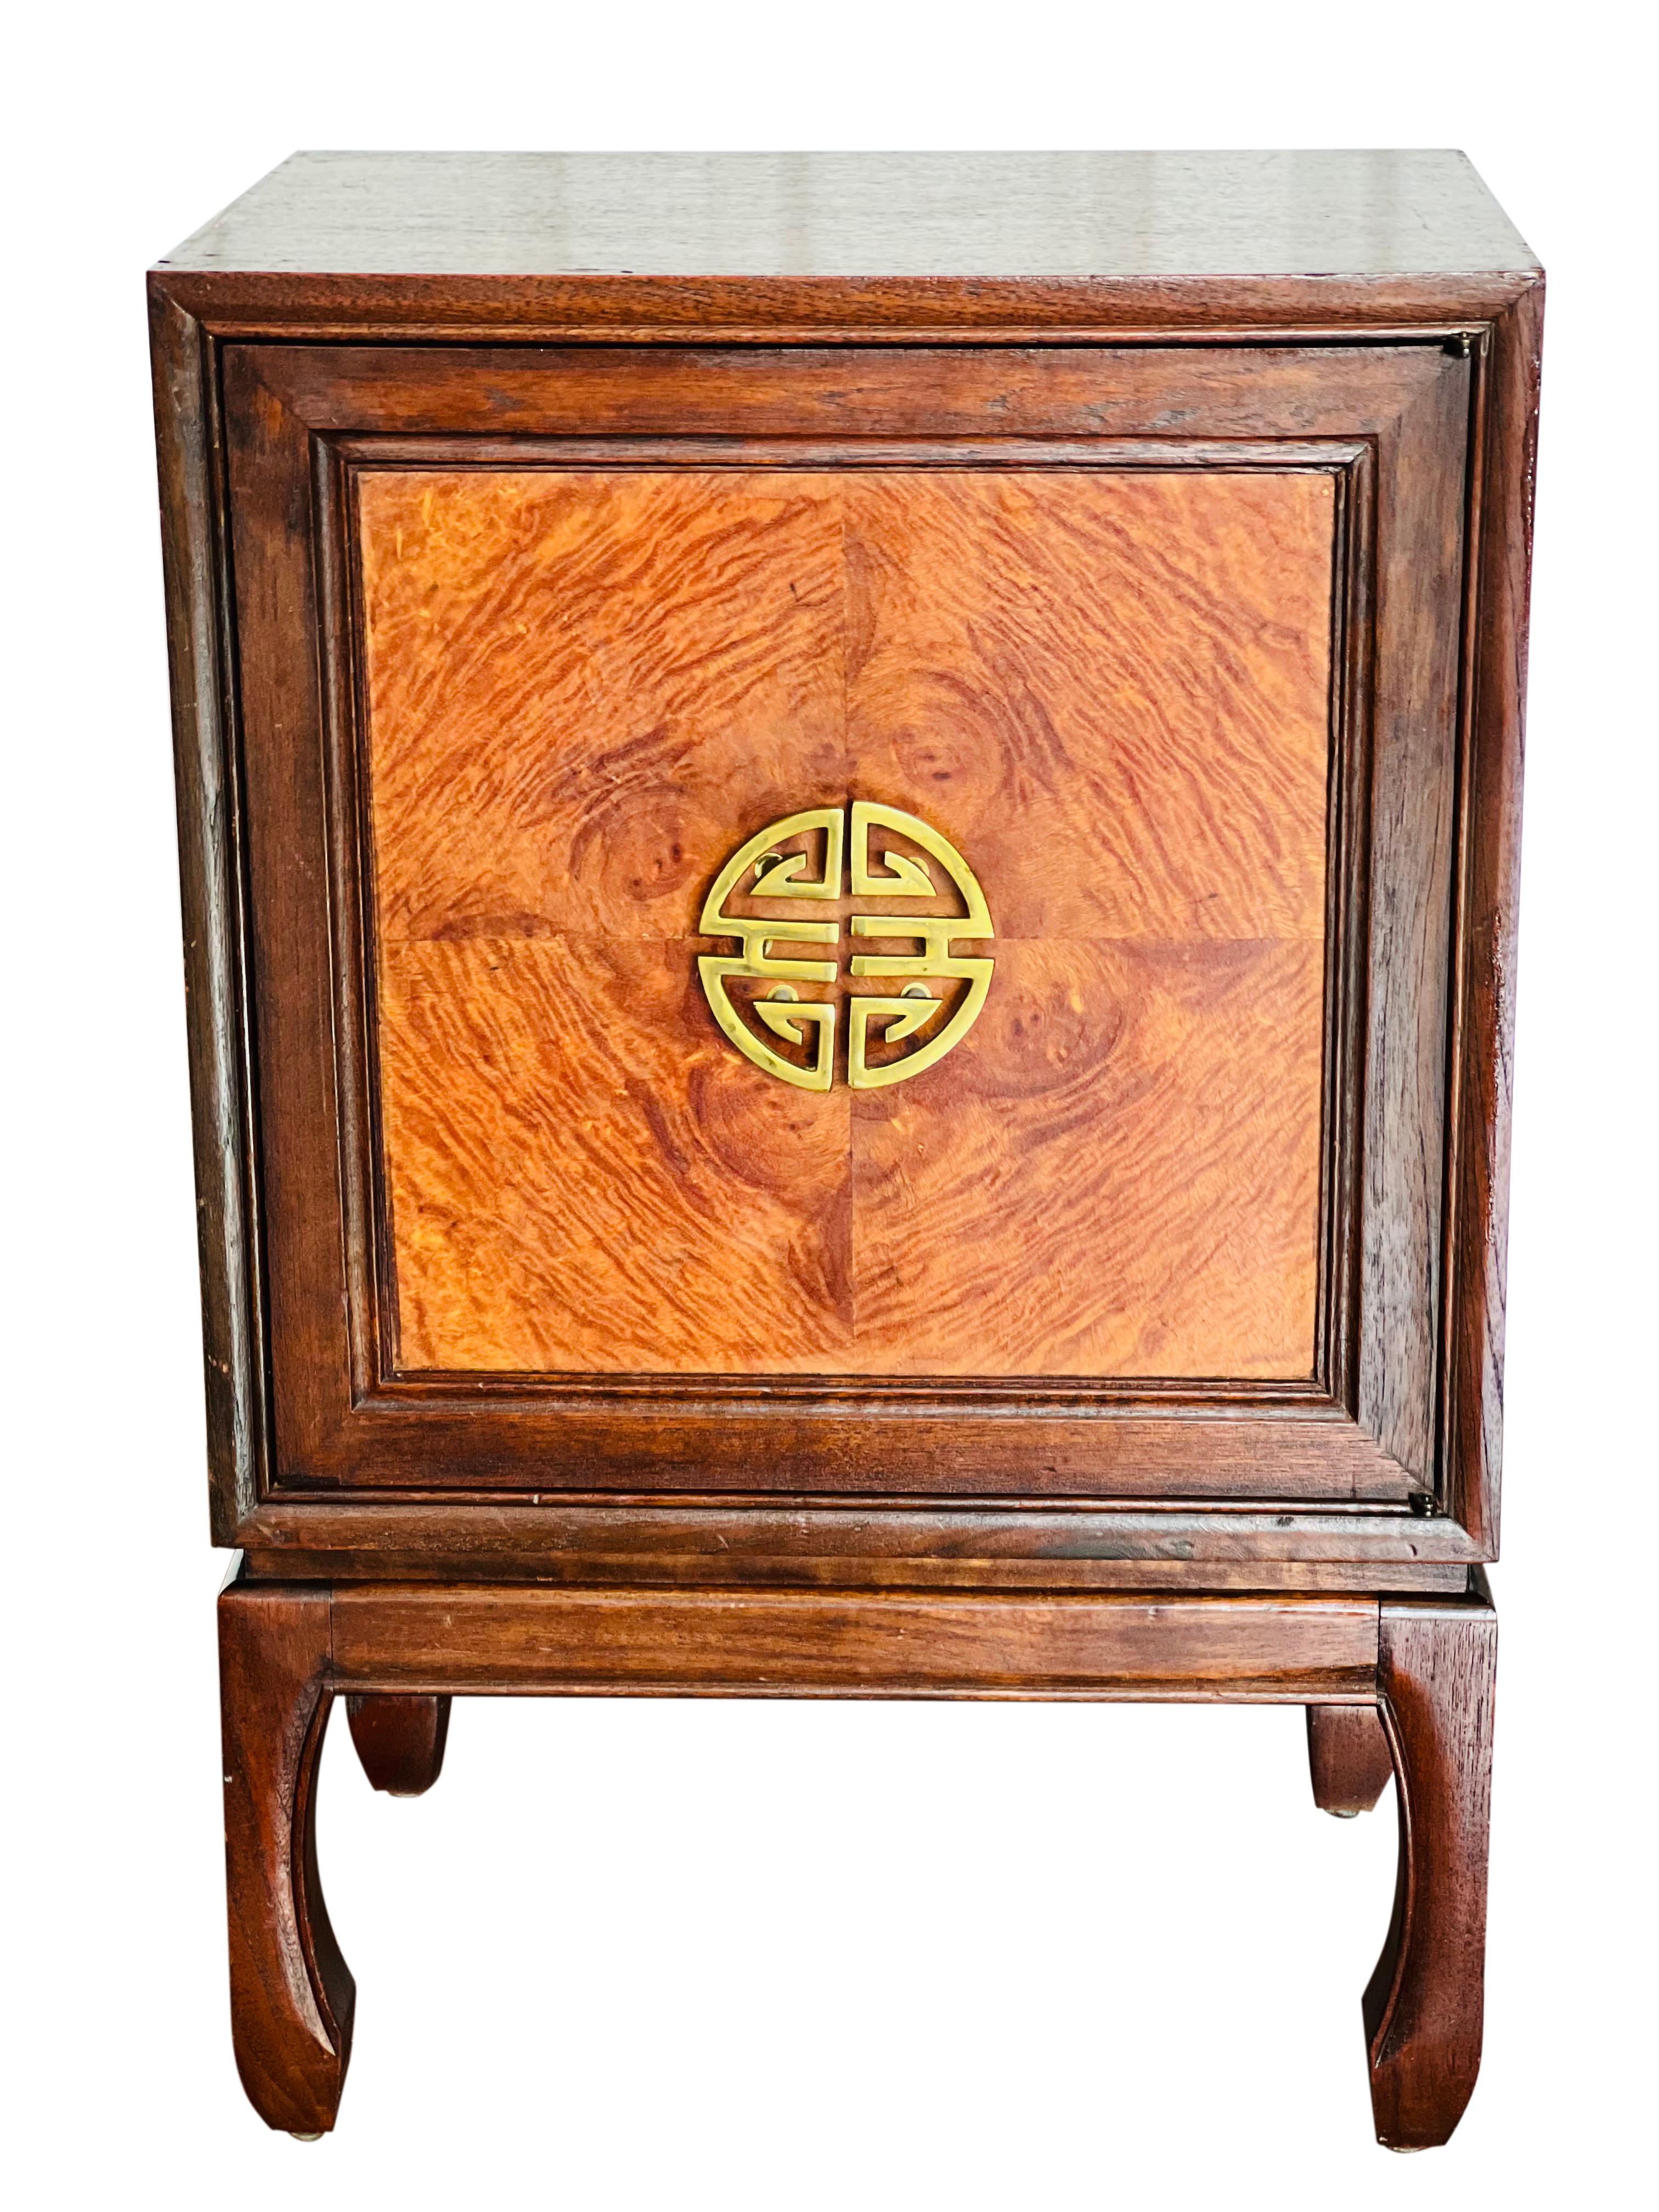 Early 20th Century Asian Style Petite Pipe and Tobacco Cabinet For Sale 7